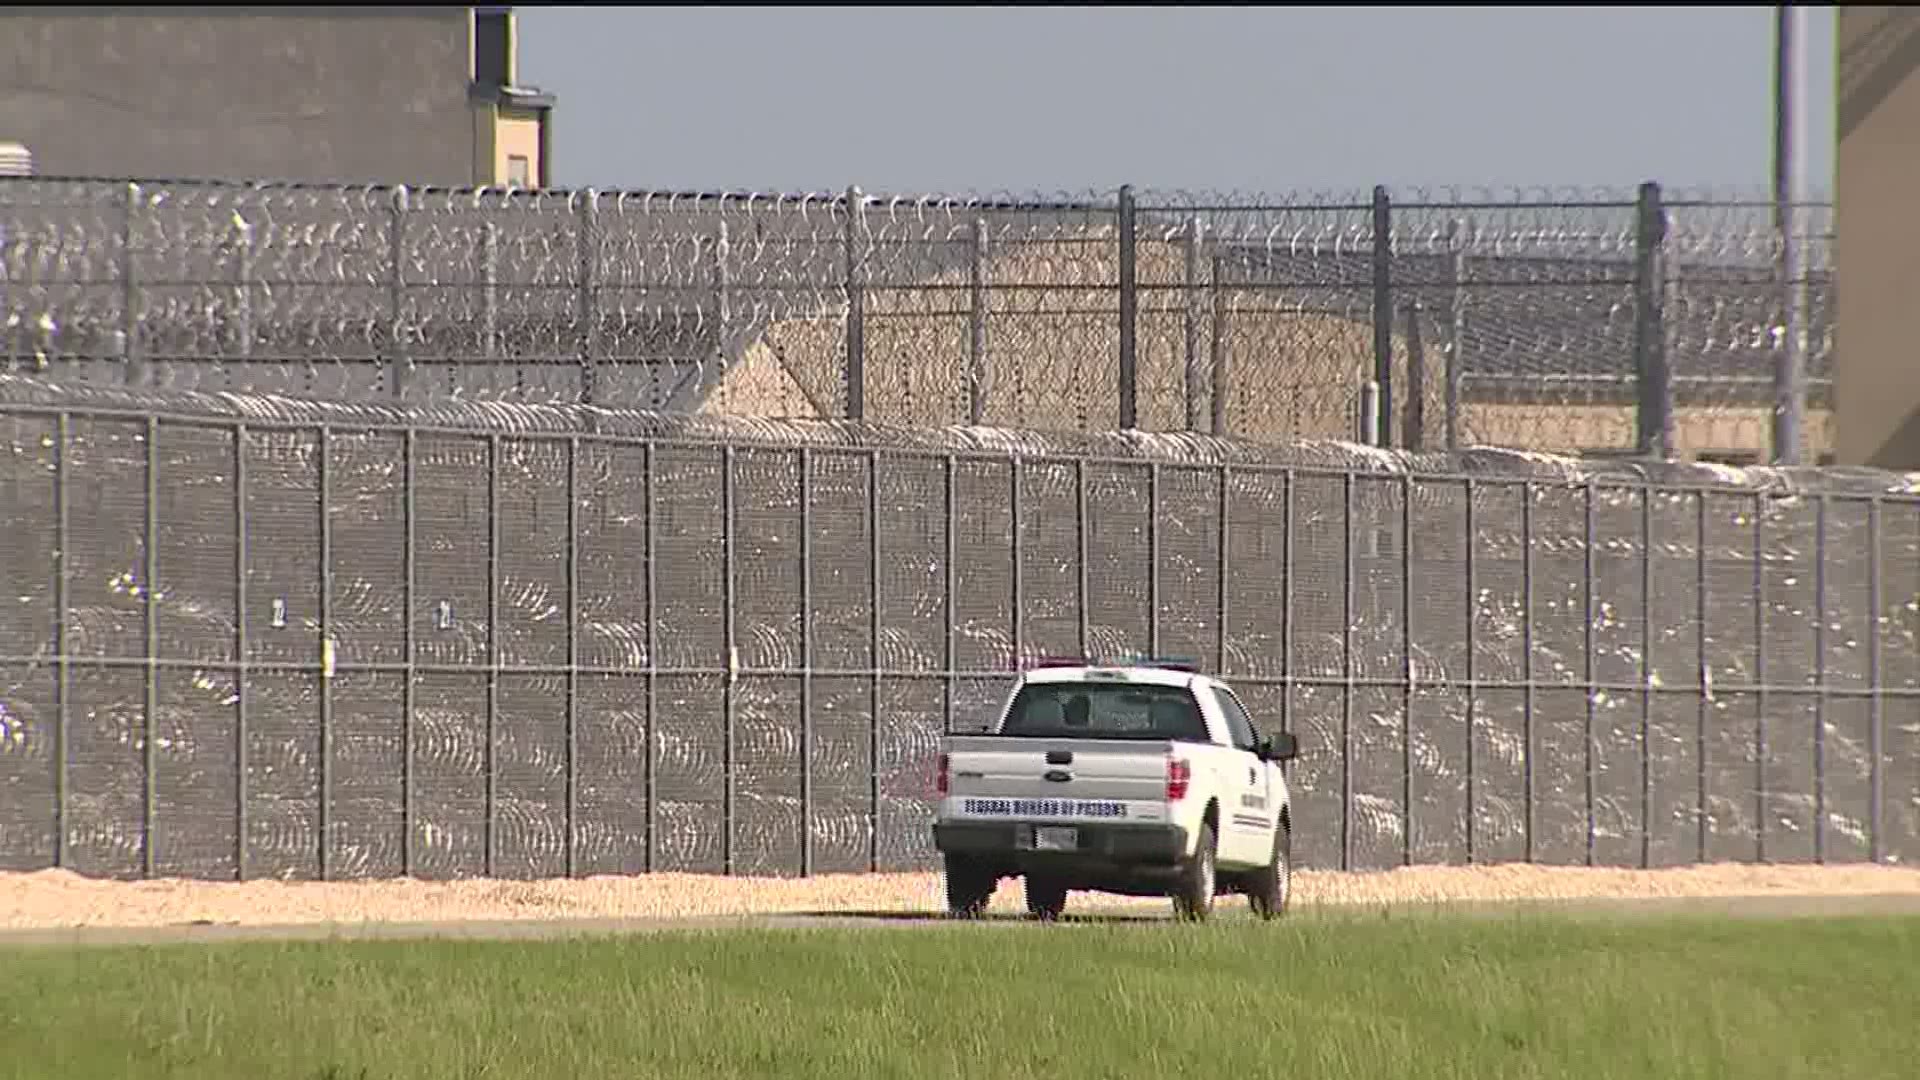 The Village of Thomson expects its population count to nearly triple due to the number of convicts at the Thomson prison. And that means more federal funds.